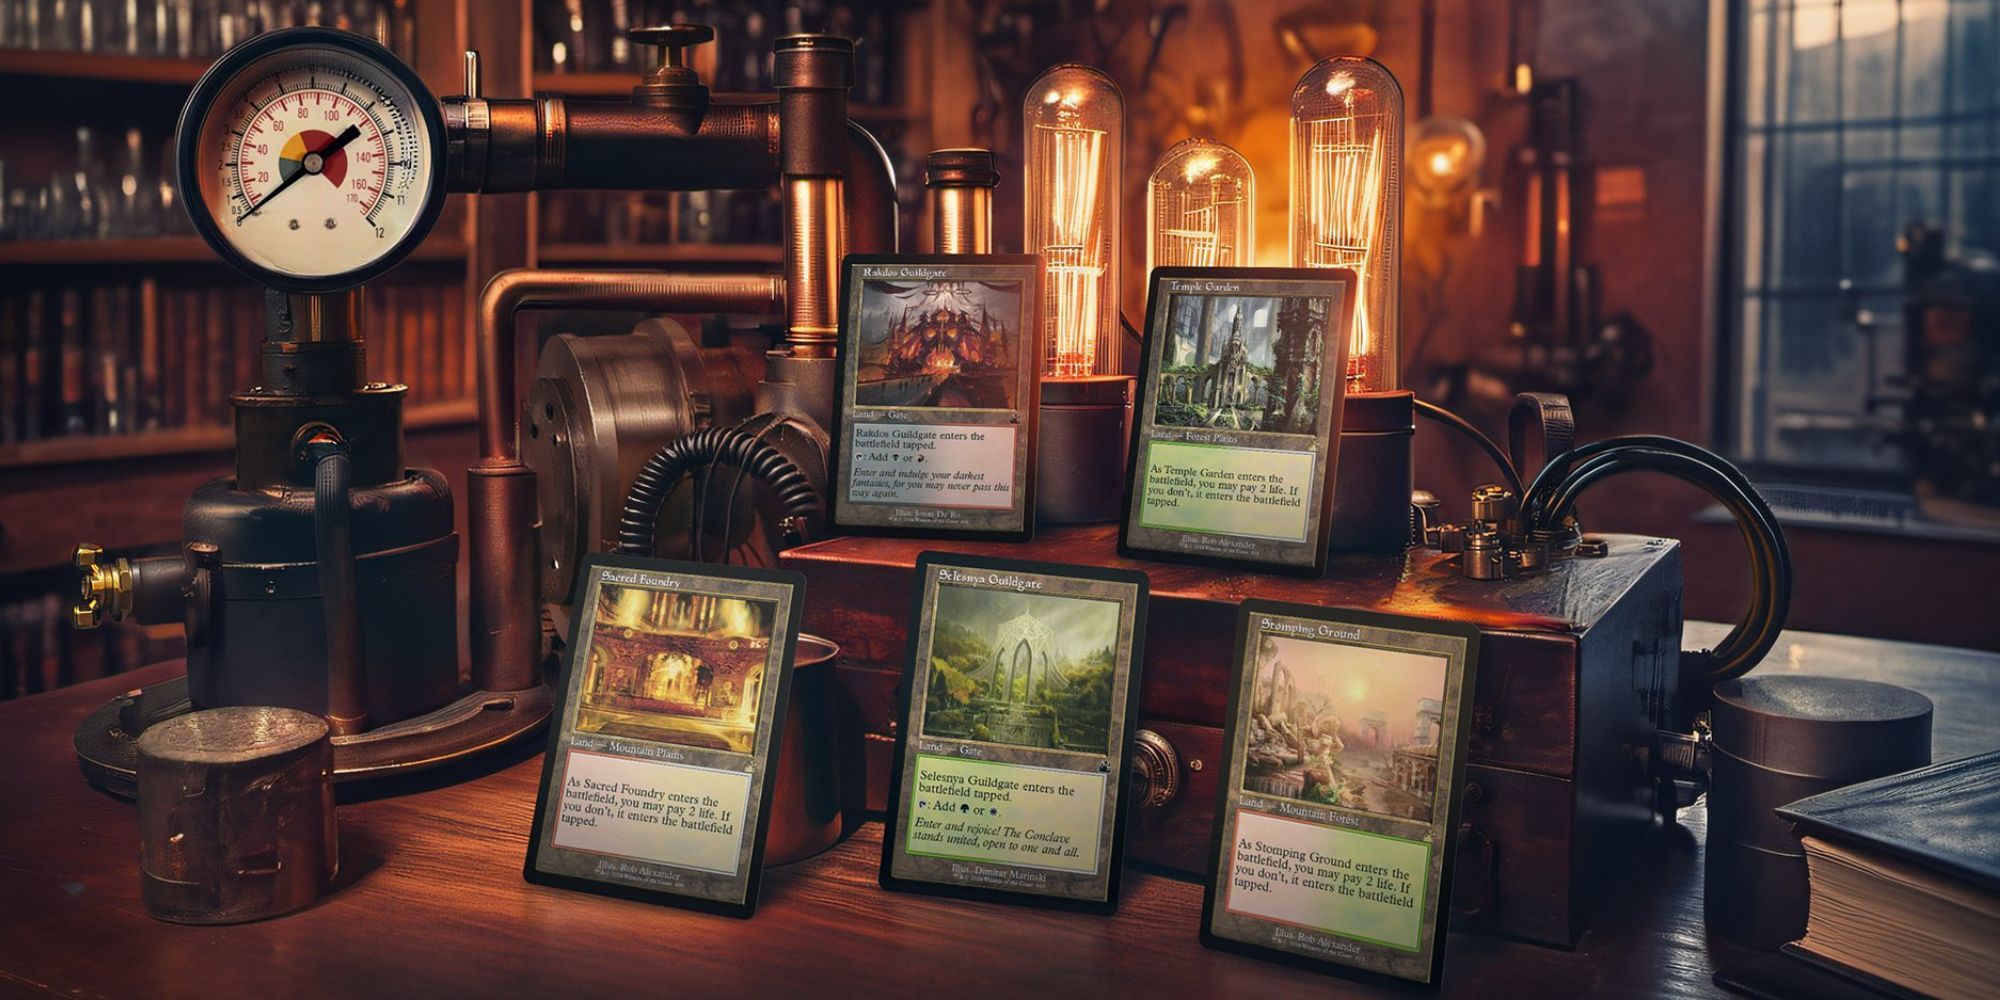 A collection of Magic: The Gathering cards, posed in a backdrop that looks Steampunk inspired